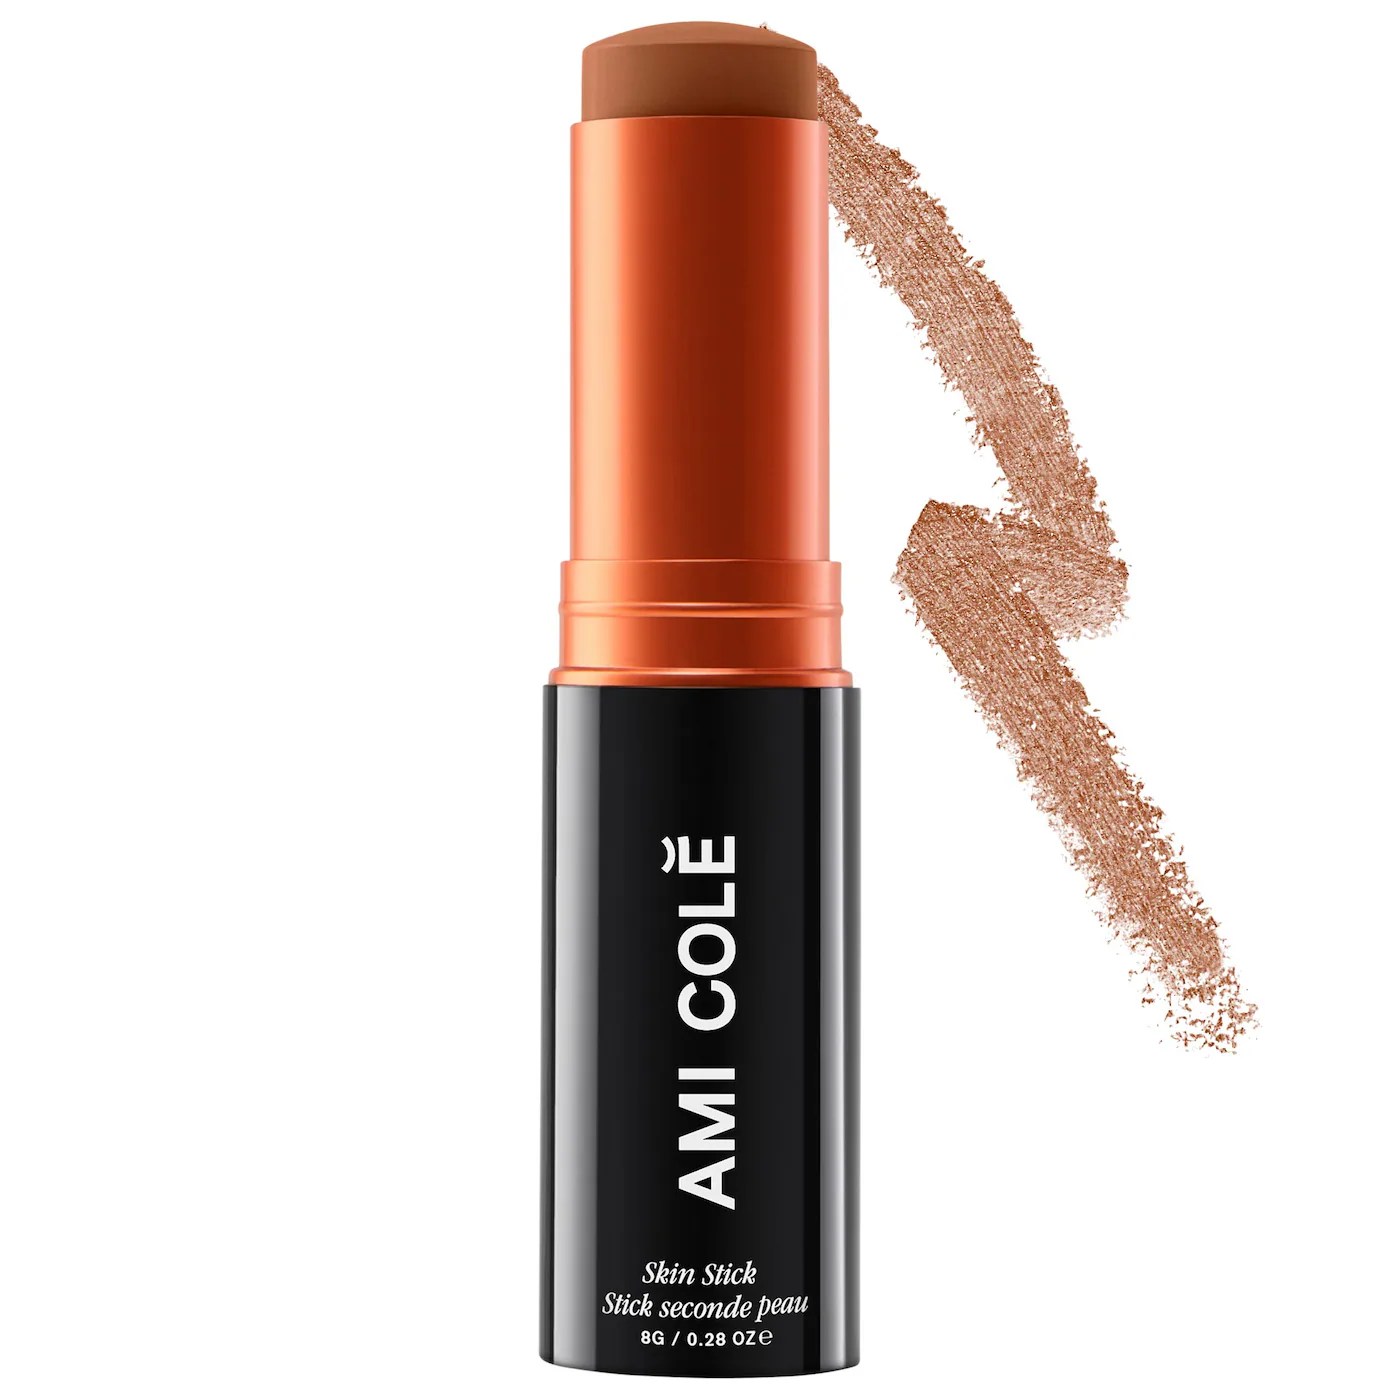 ami cole skin-enhancing stick, one of the best foundations for acne-prone skin